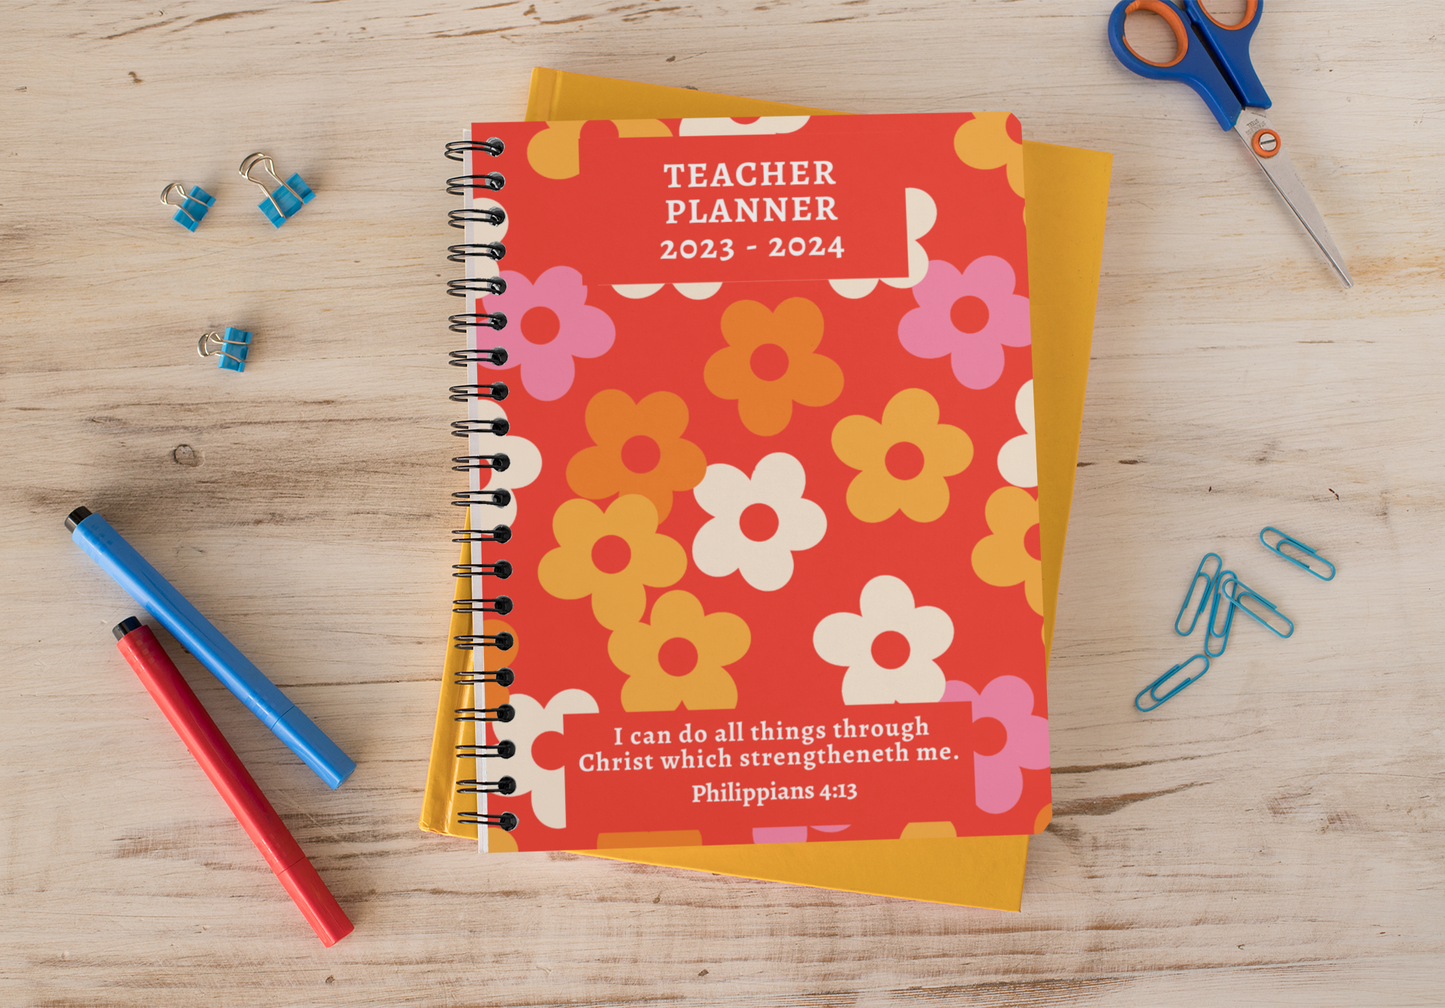 Teacher Planner - I Can Do All Things Through Christ Which Strengthen Me